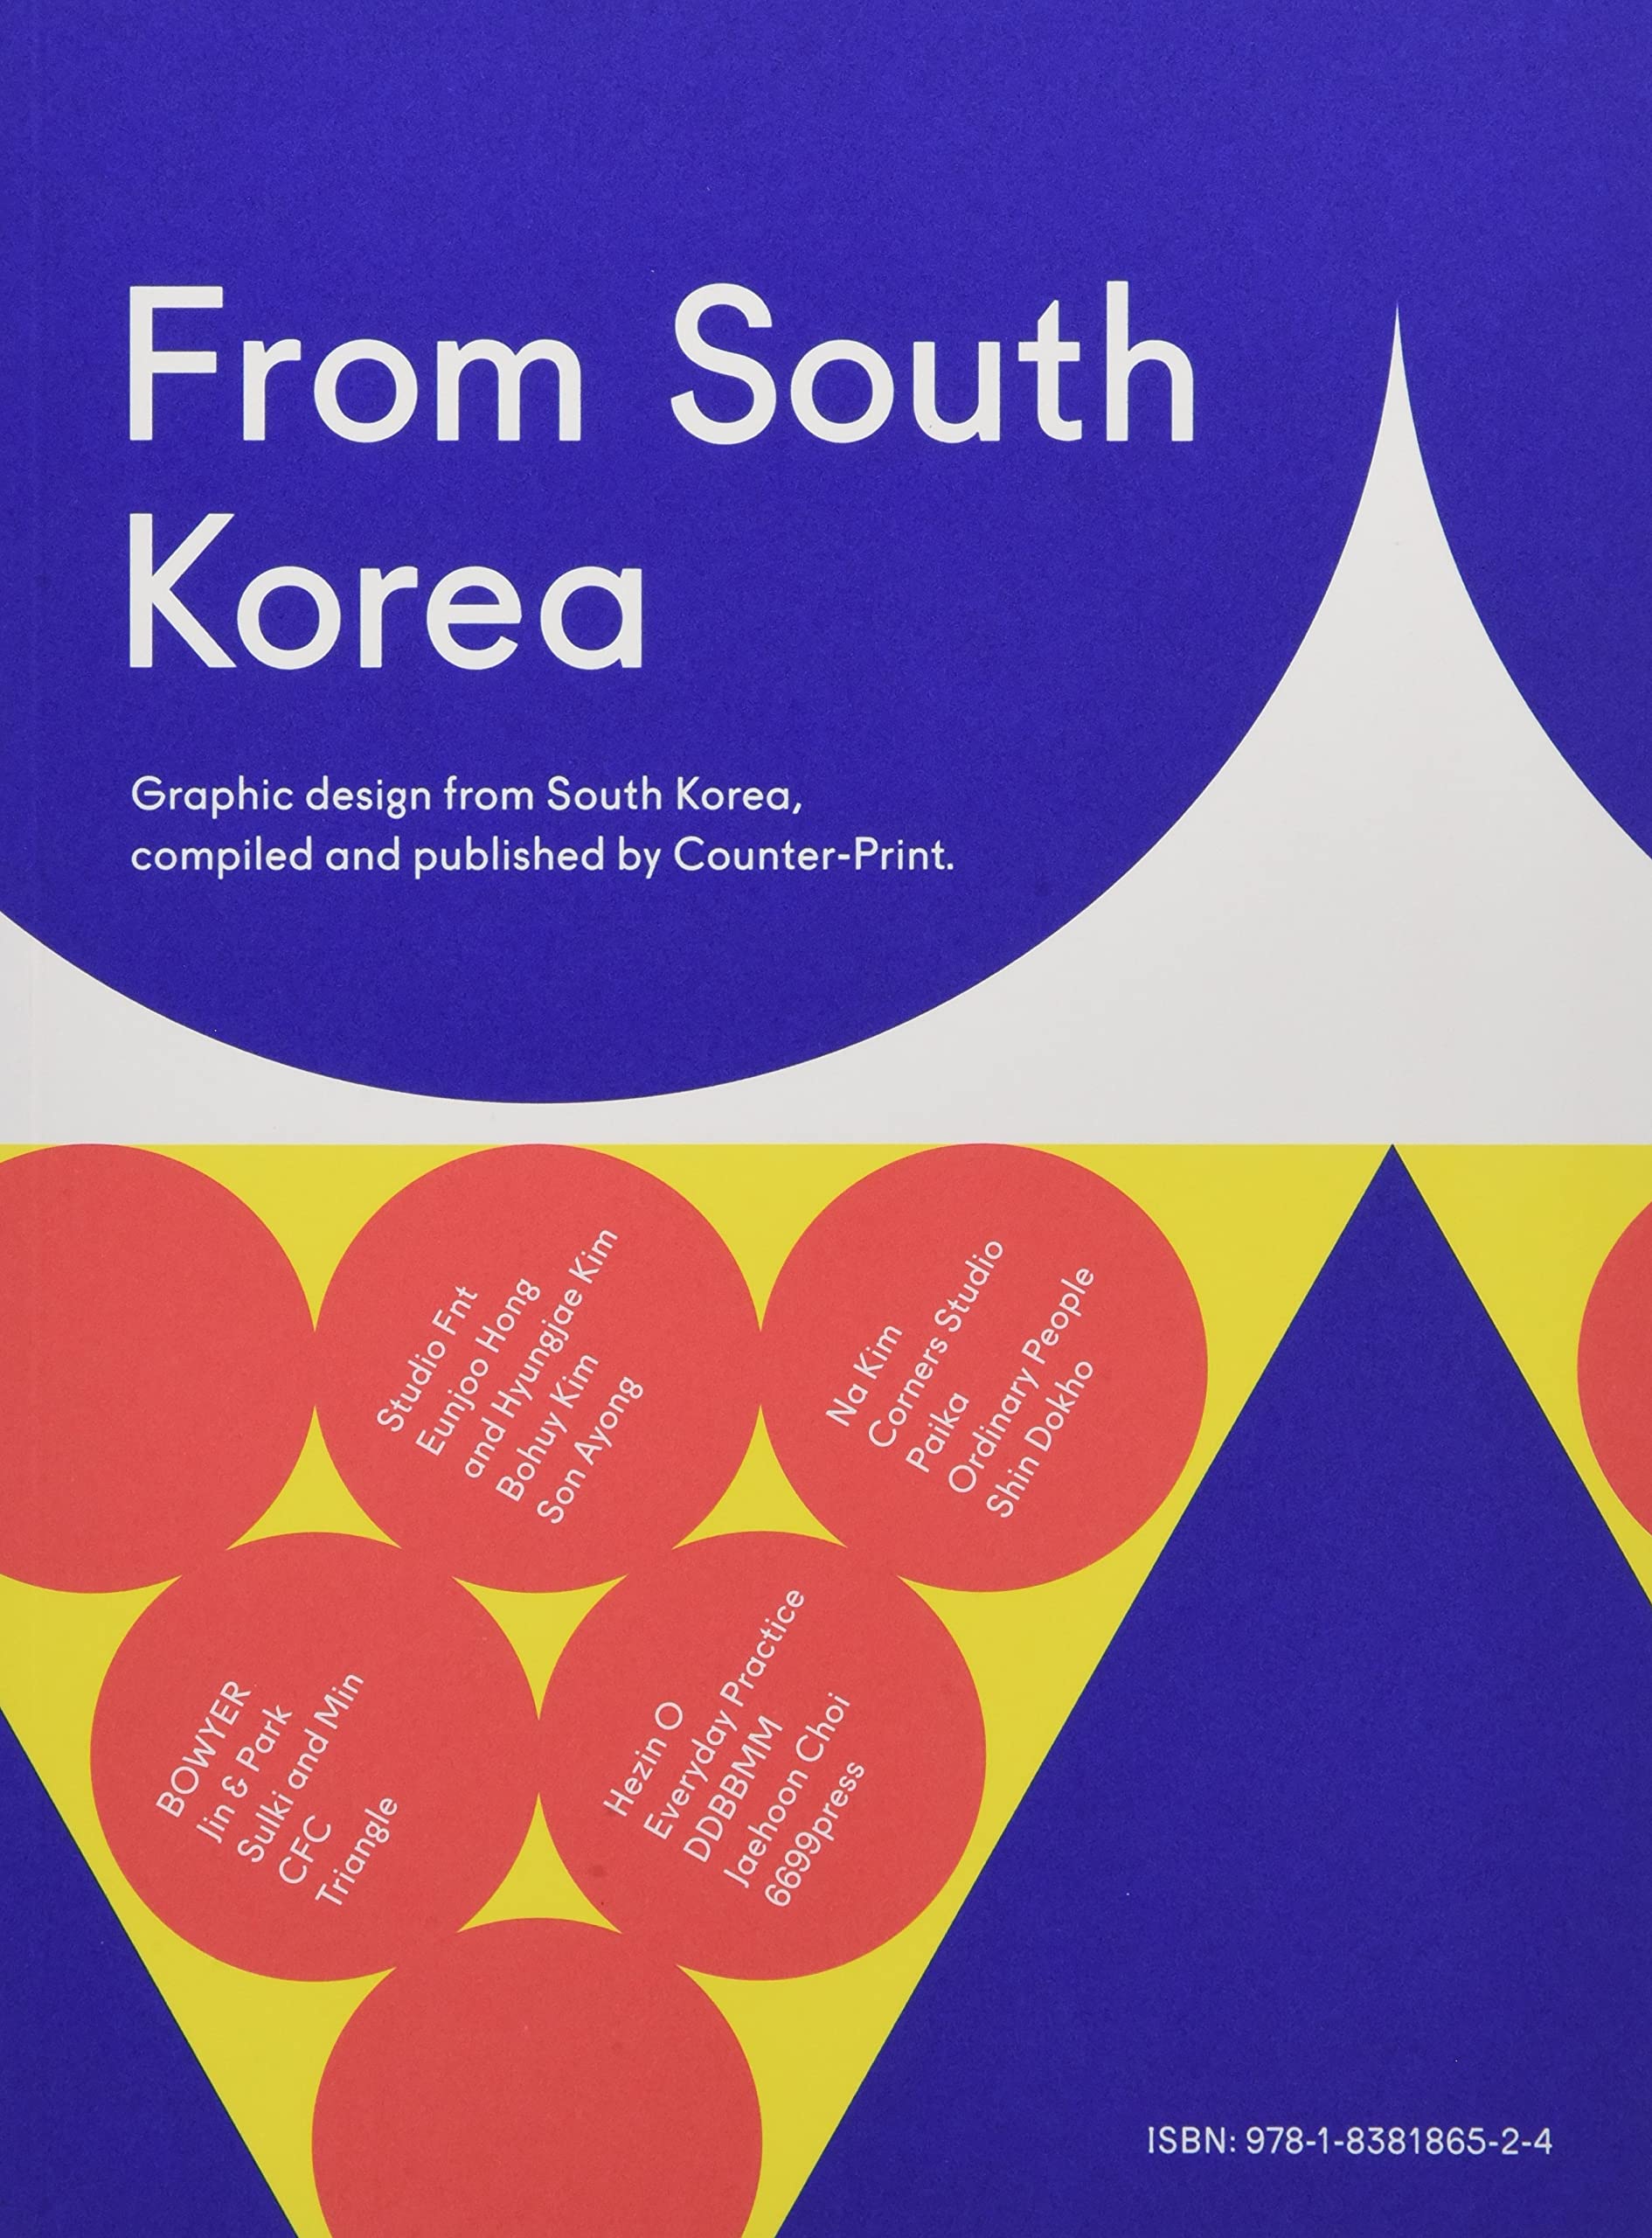 Graphic Design From South Korea | Jon Dowling